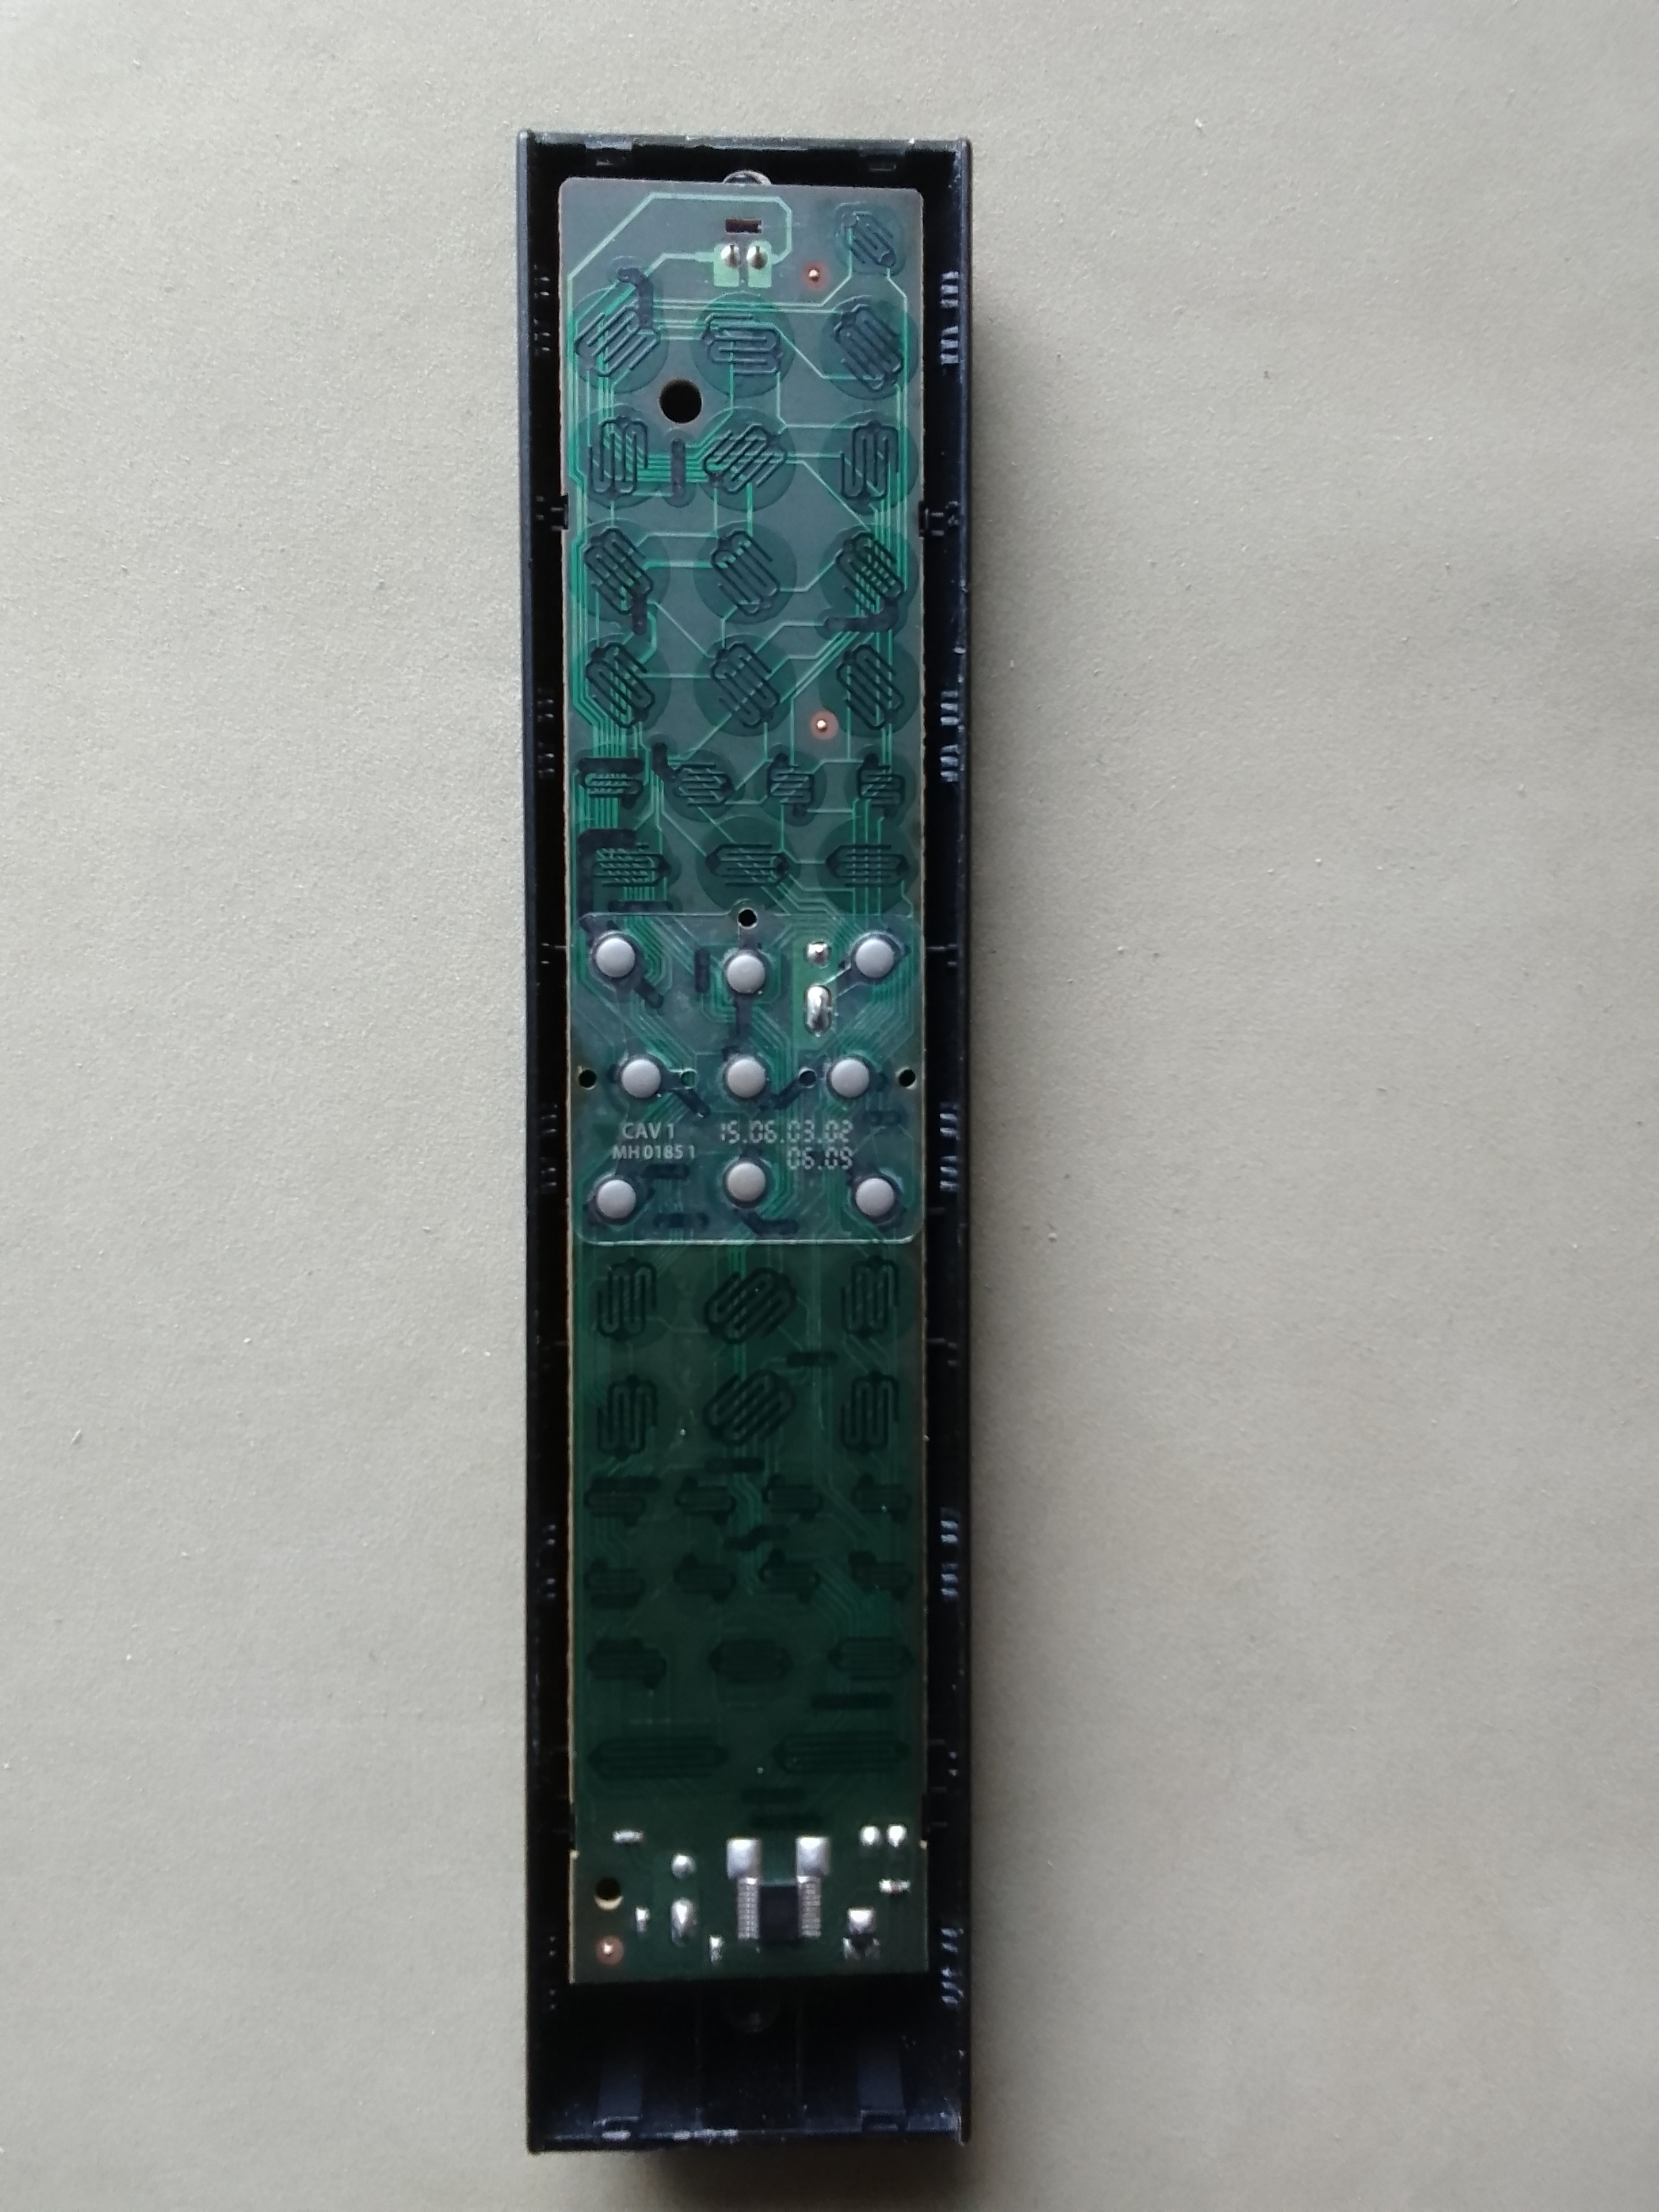 Photo of the board of the remote control. In the centre are 9 round silver buttons